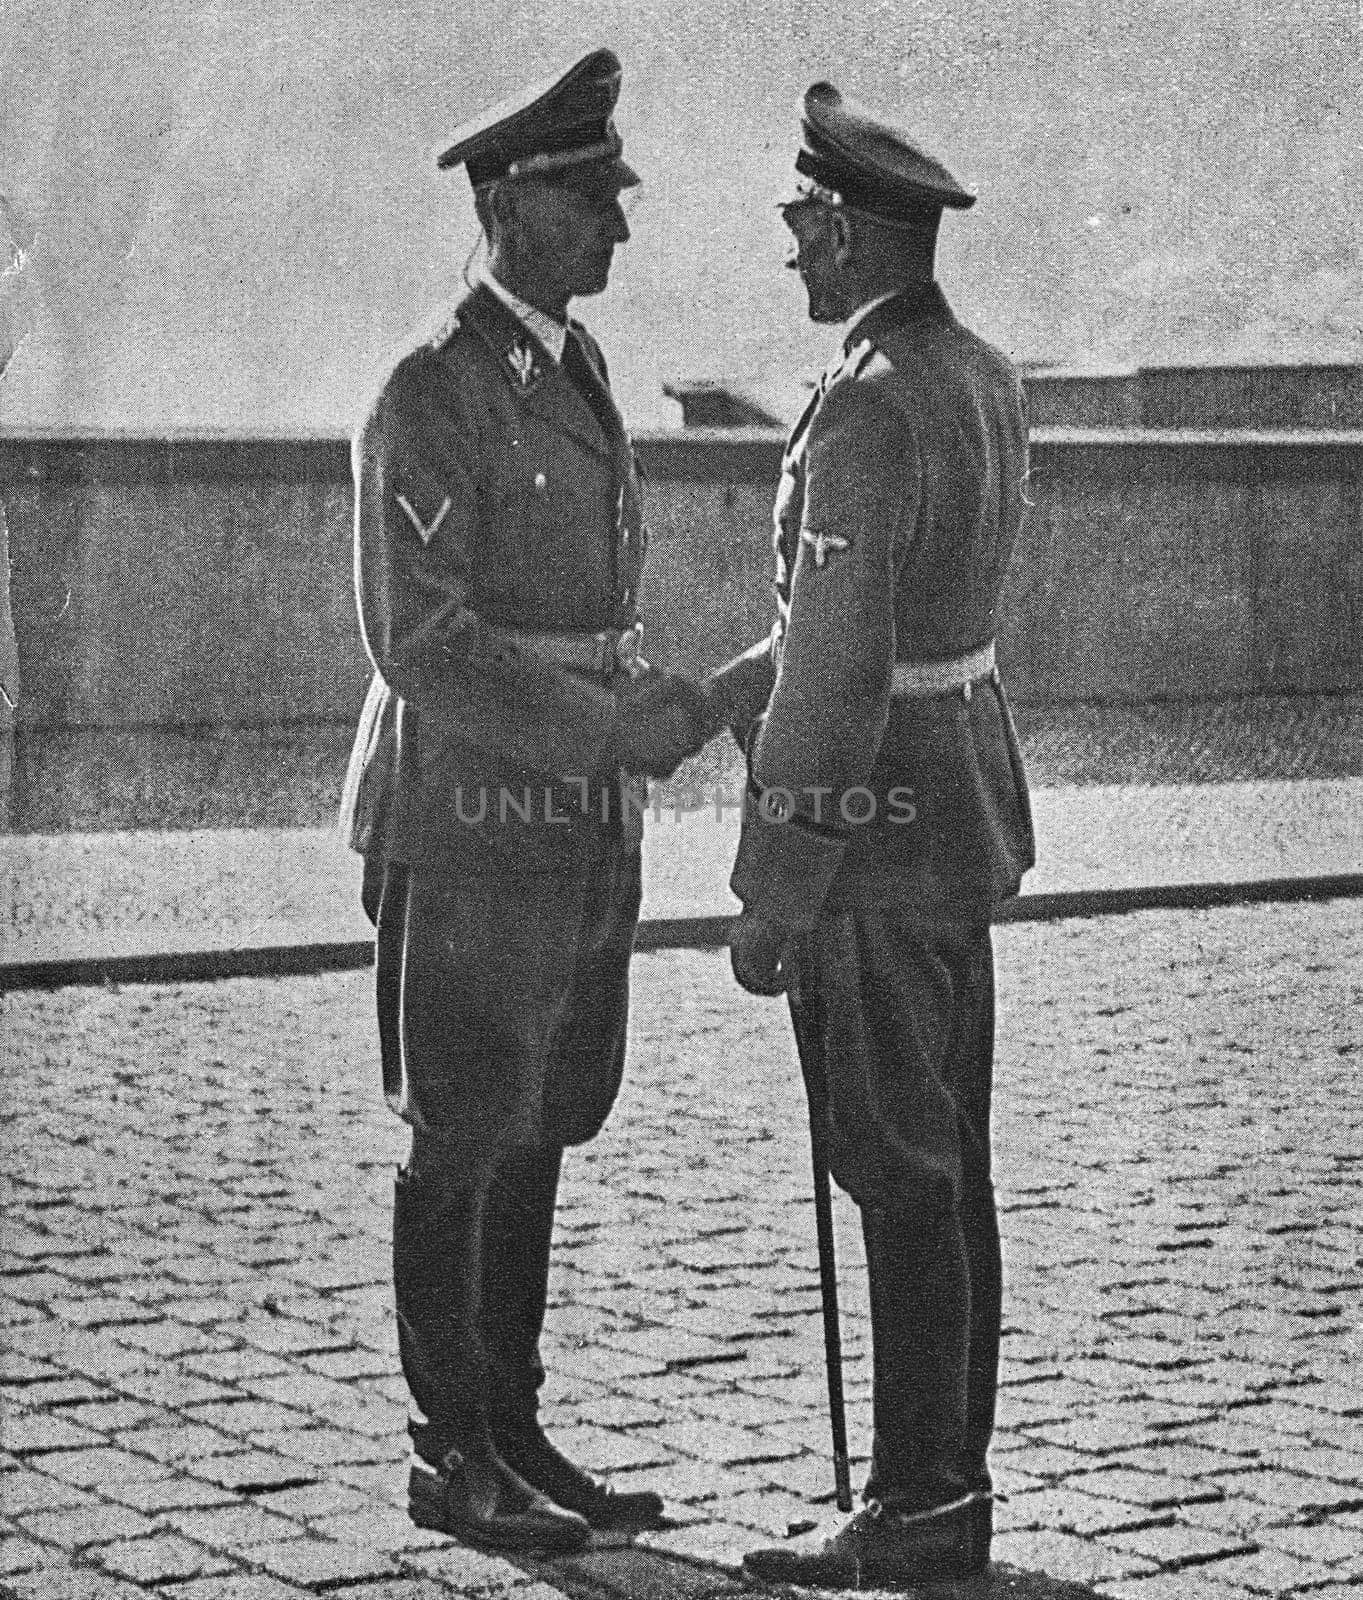 On 27 September 1941, Heydrich was appointed Deputy Reich Protector of the Protectorate of Bohemia and Moravia, the part of Czechoslovakia incorporated into the Reich on 15 March 1939, and assumed control of the territory. Heydrich left and K.H. Frank at Prague castle. by roman_nerud